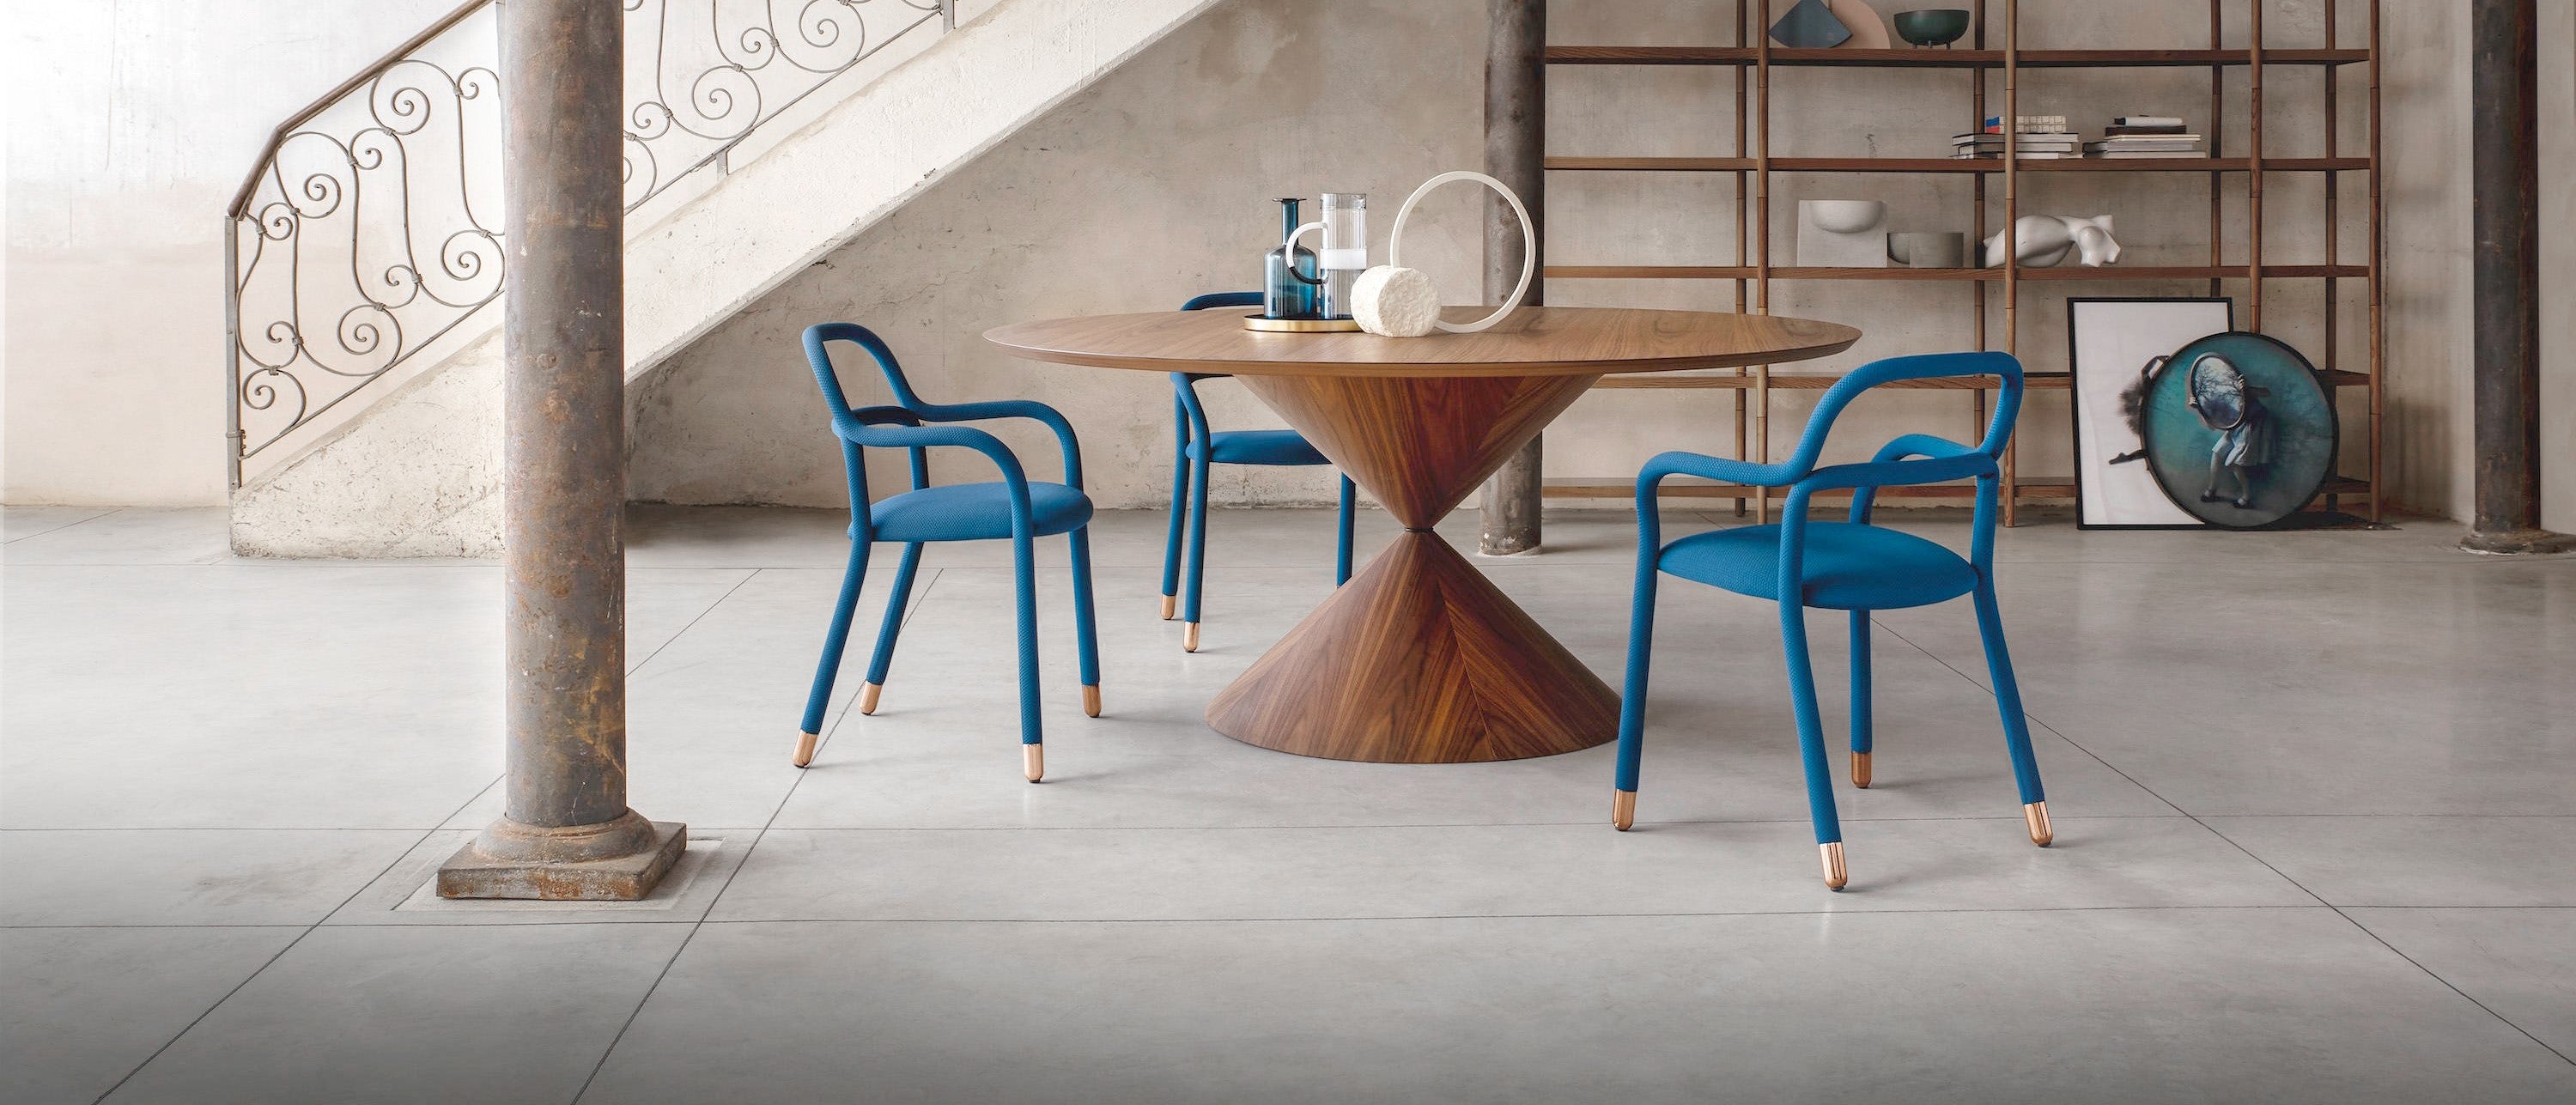 Versatile Round Dining Tables: Seamlessly Adapting From Breakfast to Dinner